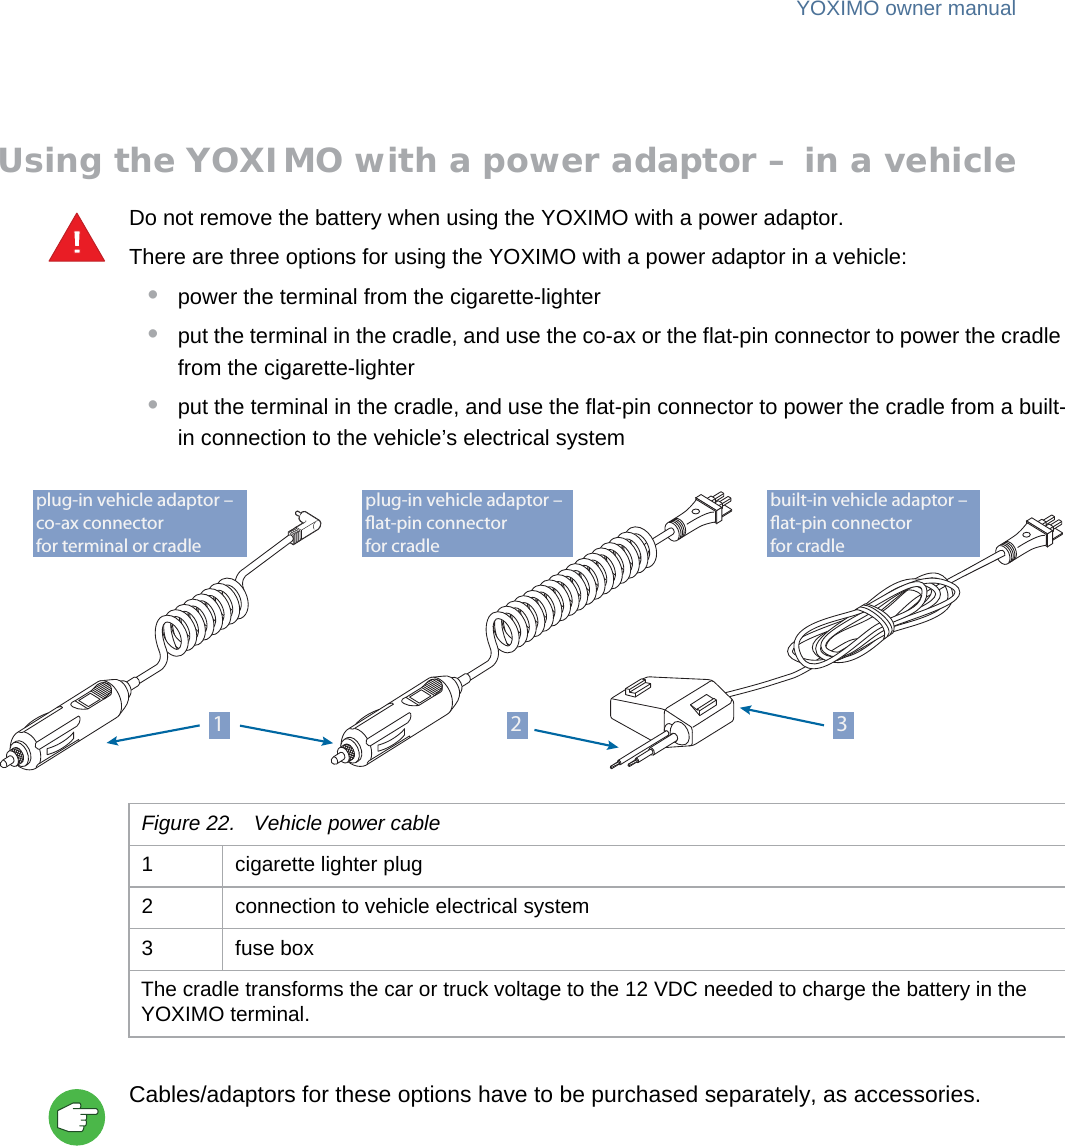 YOXIMO owner manual22  publiclast updated 30/9/15 document release 1.1 om_yxm_powerSupply.fmUsing the YOXIMO with a power adaptor – in a vehicleDo not remove the battery when using the YOXIMO with a power adaptor.There are three options for using the YOXIMO with a power adaptor in a vehicle:•power the terminal from the cigarette-lighter•put the terminal in the cradle, and use the co-ax or the flat-pin connector to power the cradle from the cigarette-lighter •put the terminal in the cradle, and use the flat-pin connector to power the cradle from a built-in connection to the vehicle’s electrical systemCables/adaptors for these options have to be purchased separately, as accessories.!plug-in vehicle adaptor – at-pin connectorfor cradleplug-in vehicle adaptor – co-ax connectorfor terminal or cradlebuilt-in vehicle adaptor – at-pin connectorfor cradle31 2Figure 22. Vehicle power cable1 cigarette lighter plug2 connection to vehicle electrical system3 fuse boxThe cradle transforms the car or truck voltage to the 12 VDC needed to charge the battery in the YOXIMO terminal.